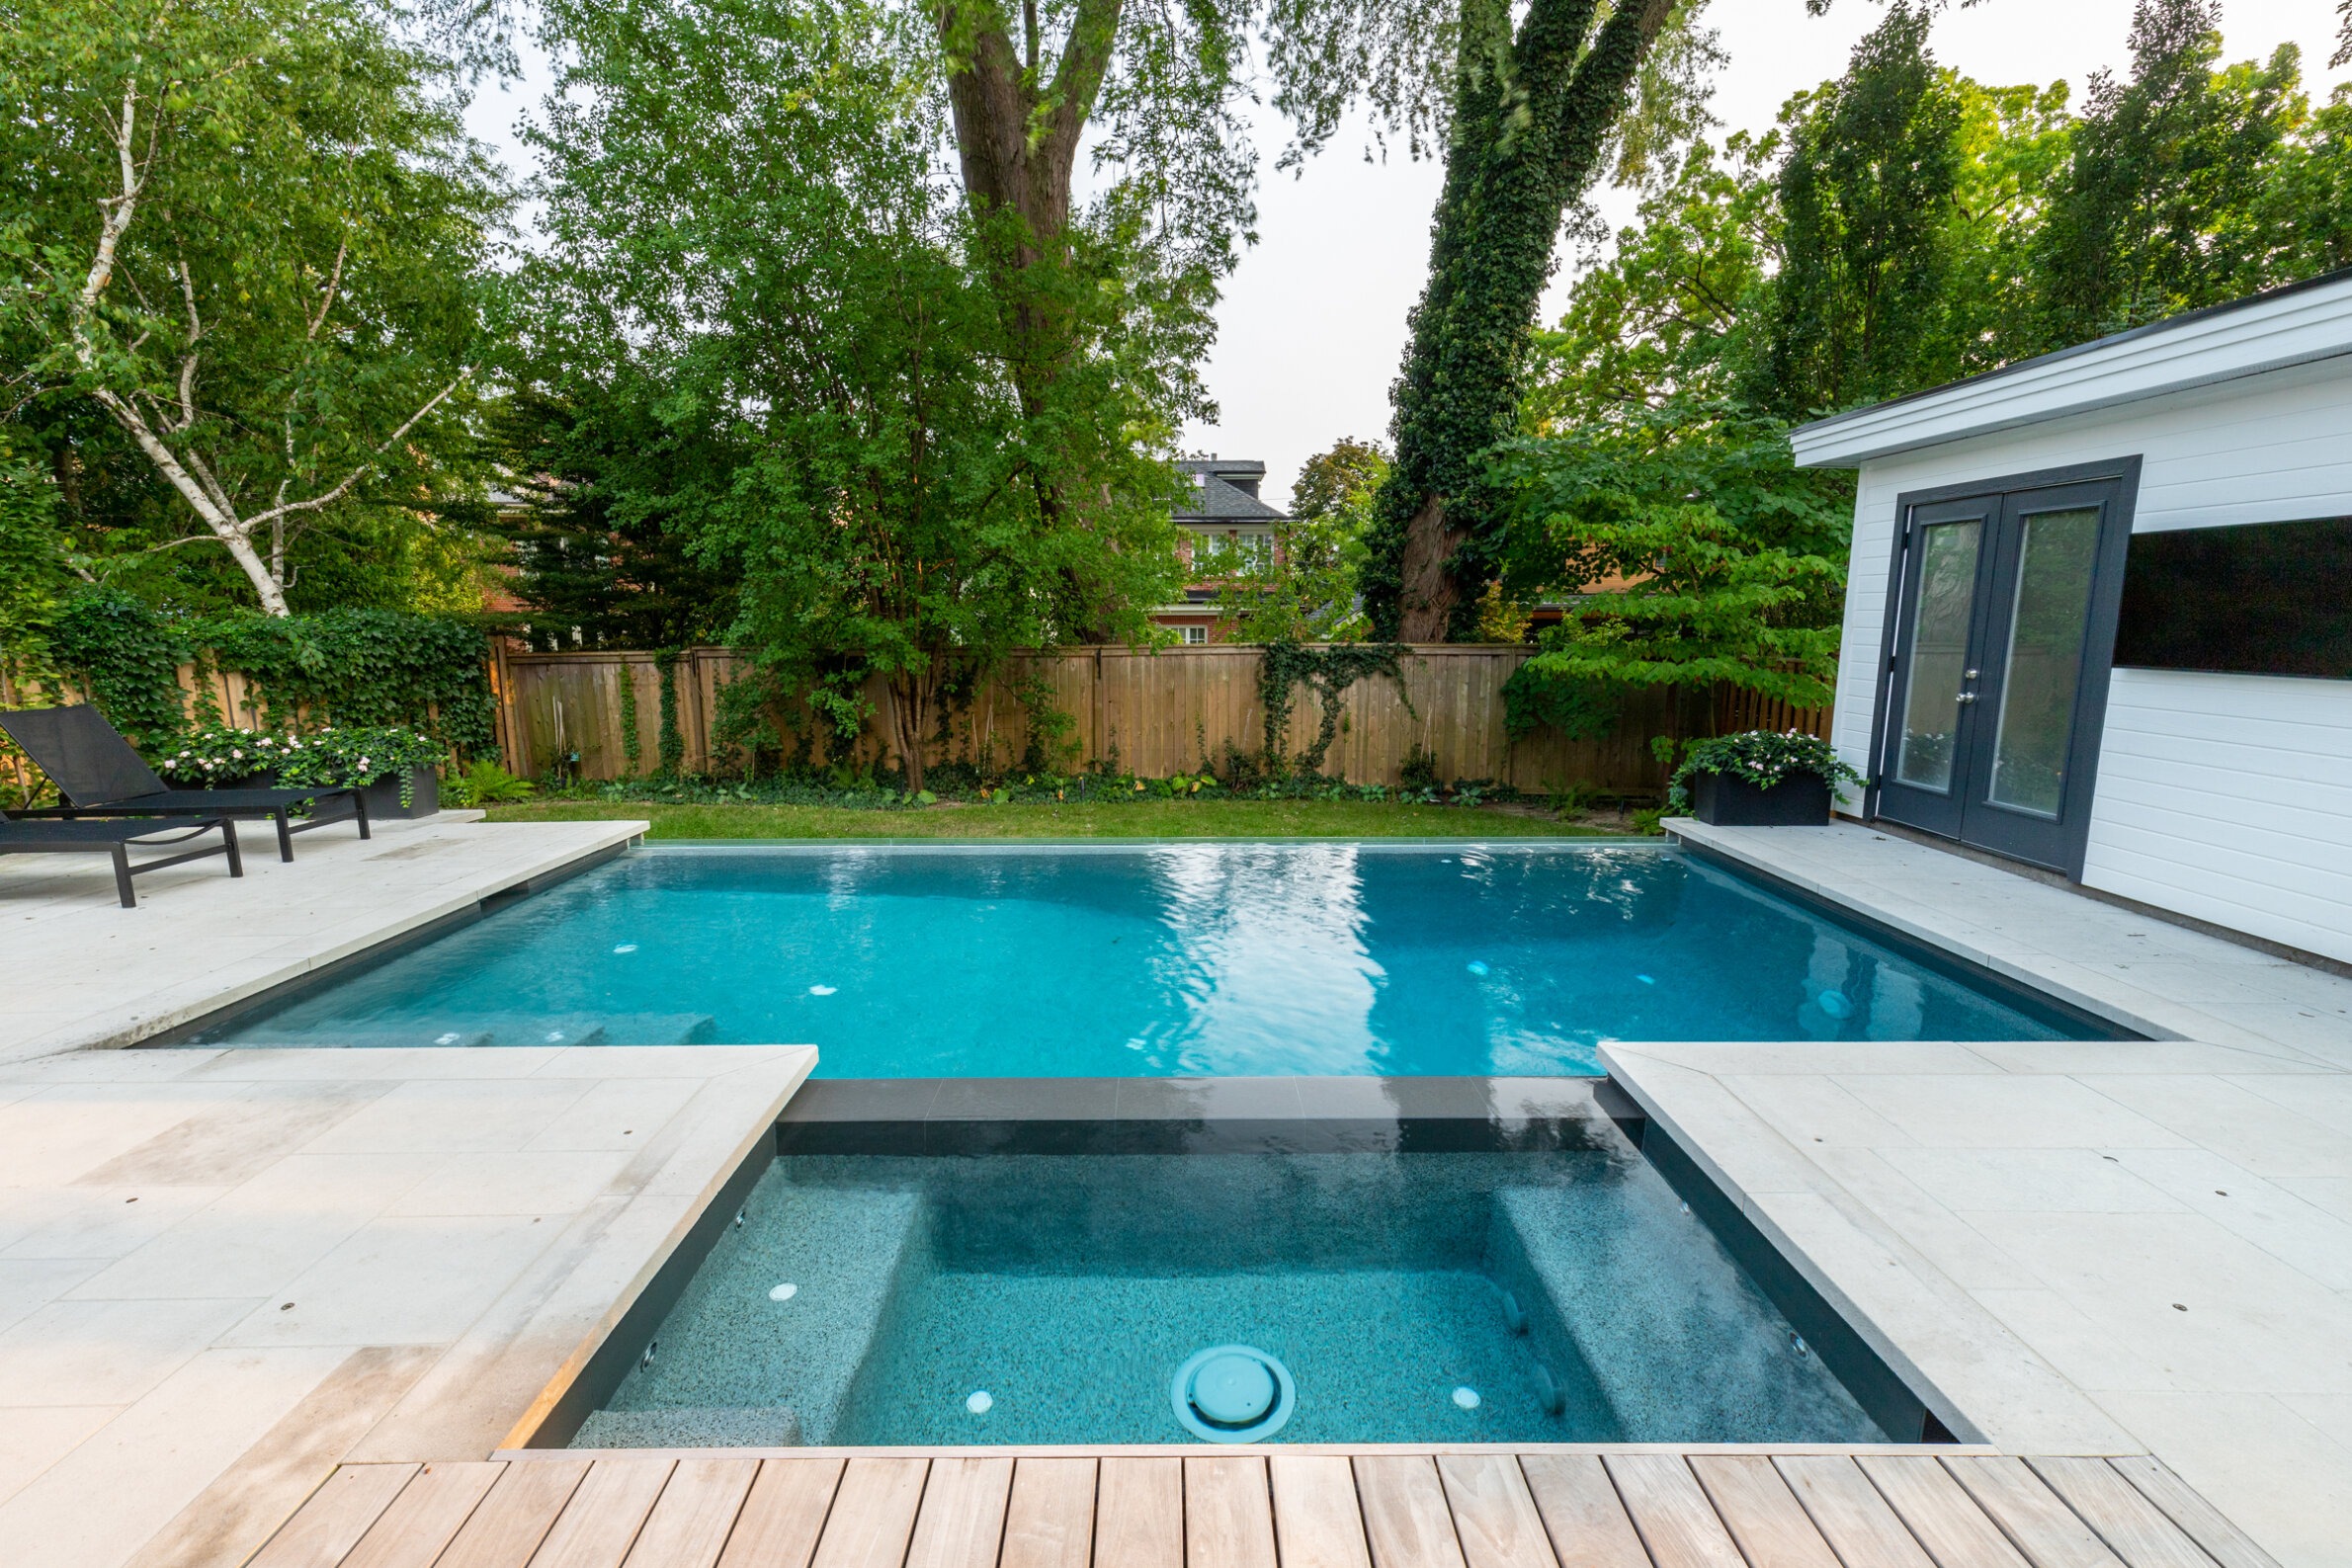 An outdoor swimming pool with an attached hot tub, surrounded by a wooden deck, lounge chair, lush trees, and a fence. A modern house is visible.